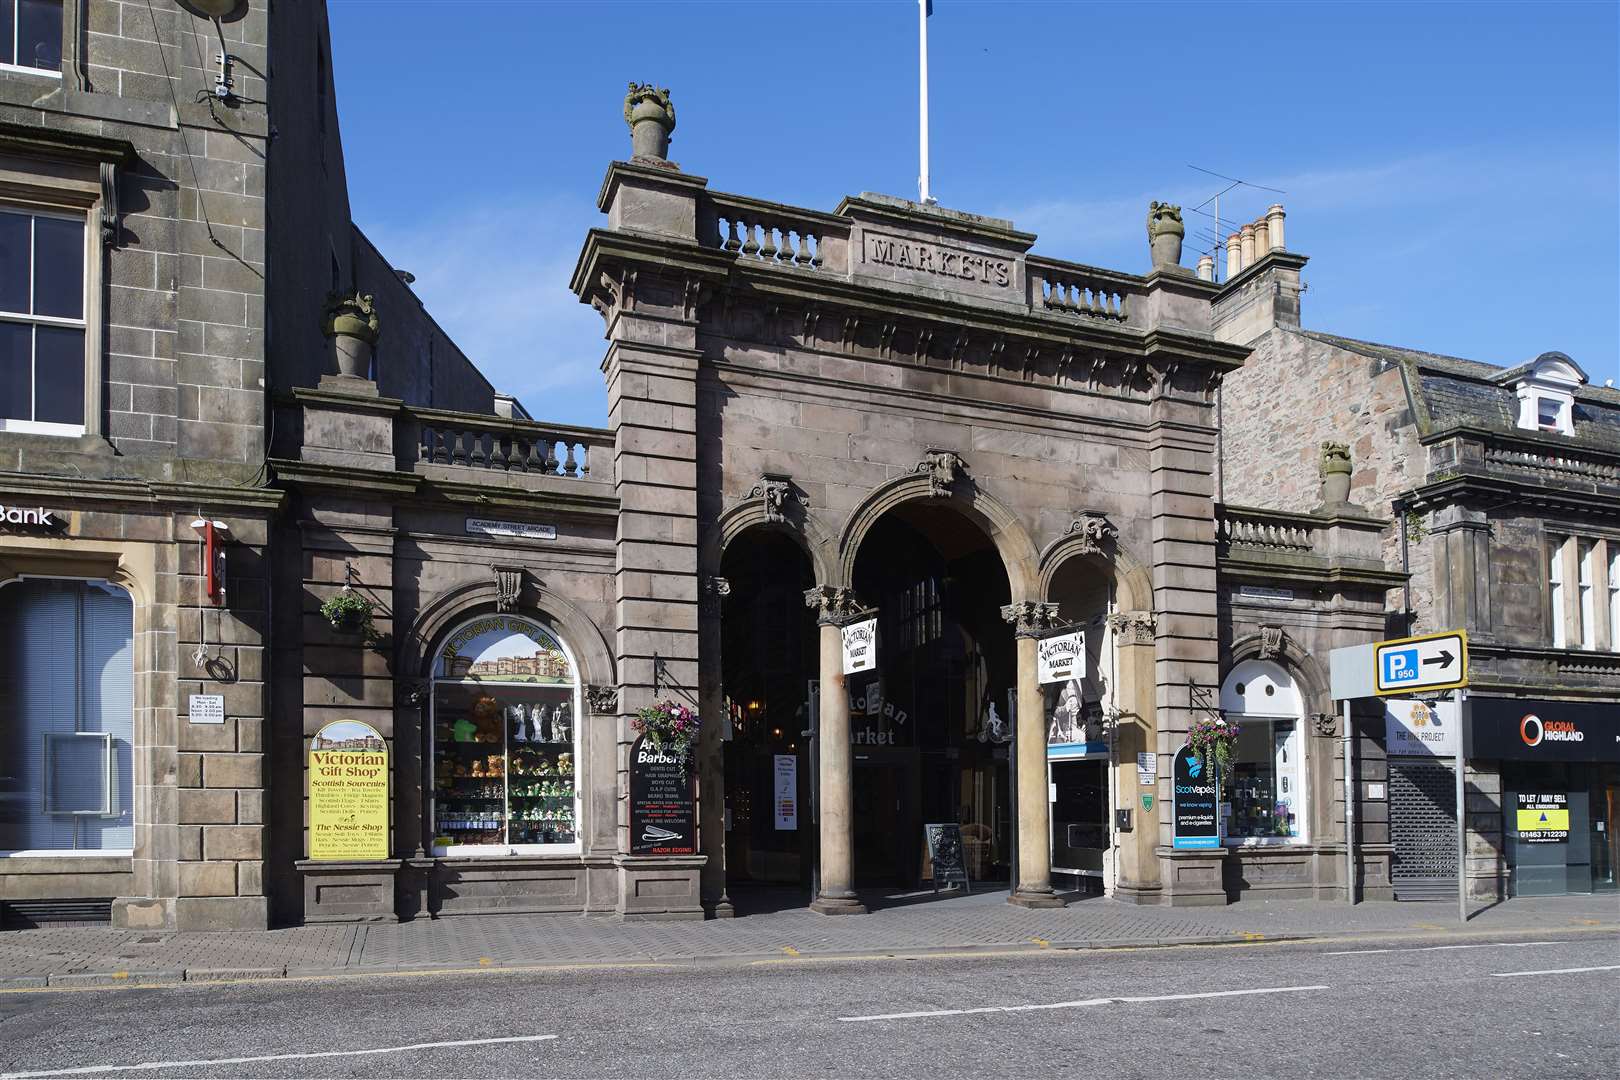 The Victorian Market in Inverness is an important part of the city's Old Town.